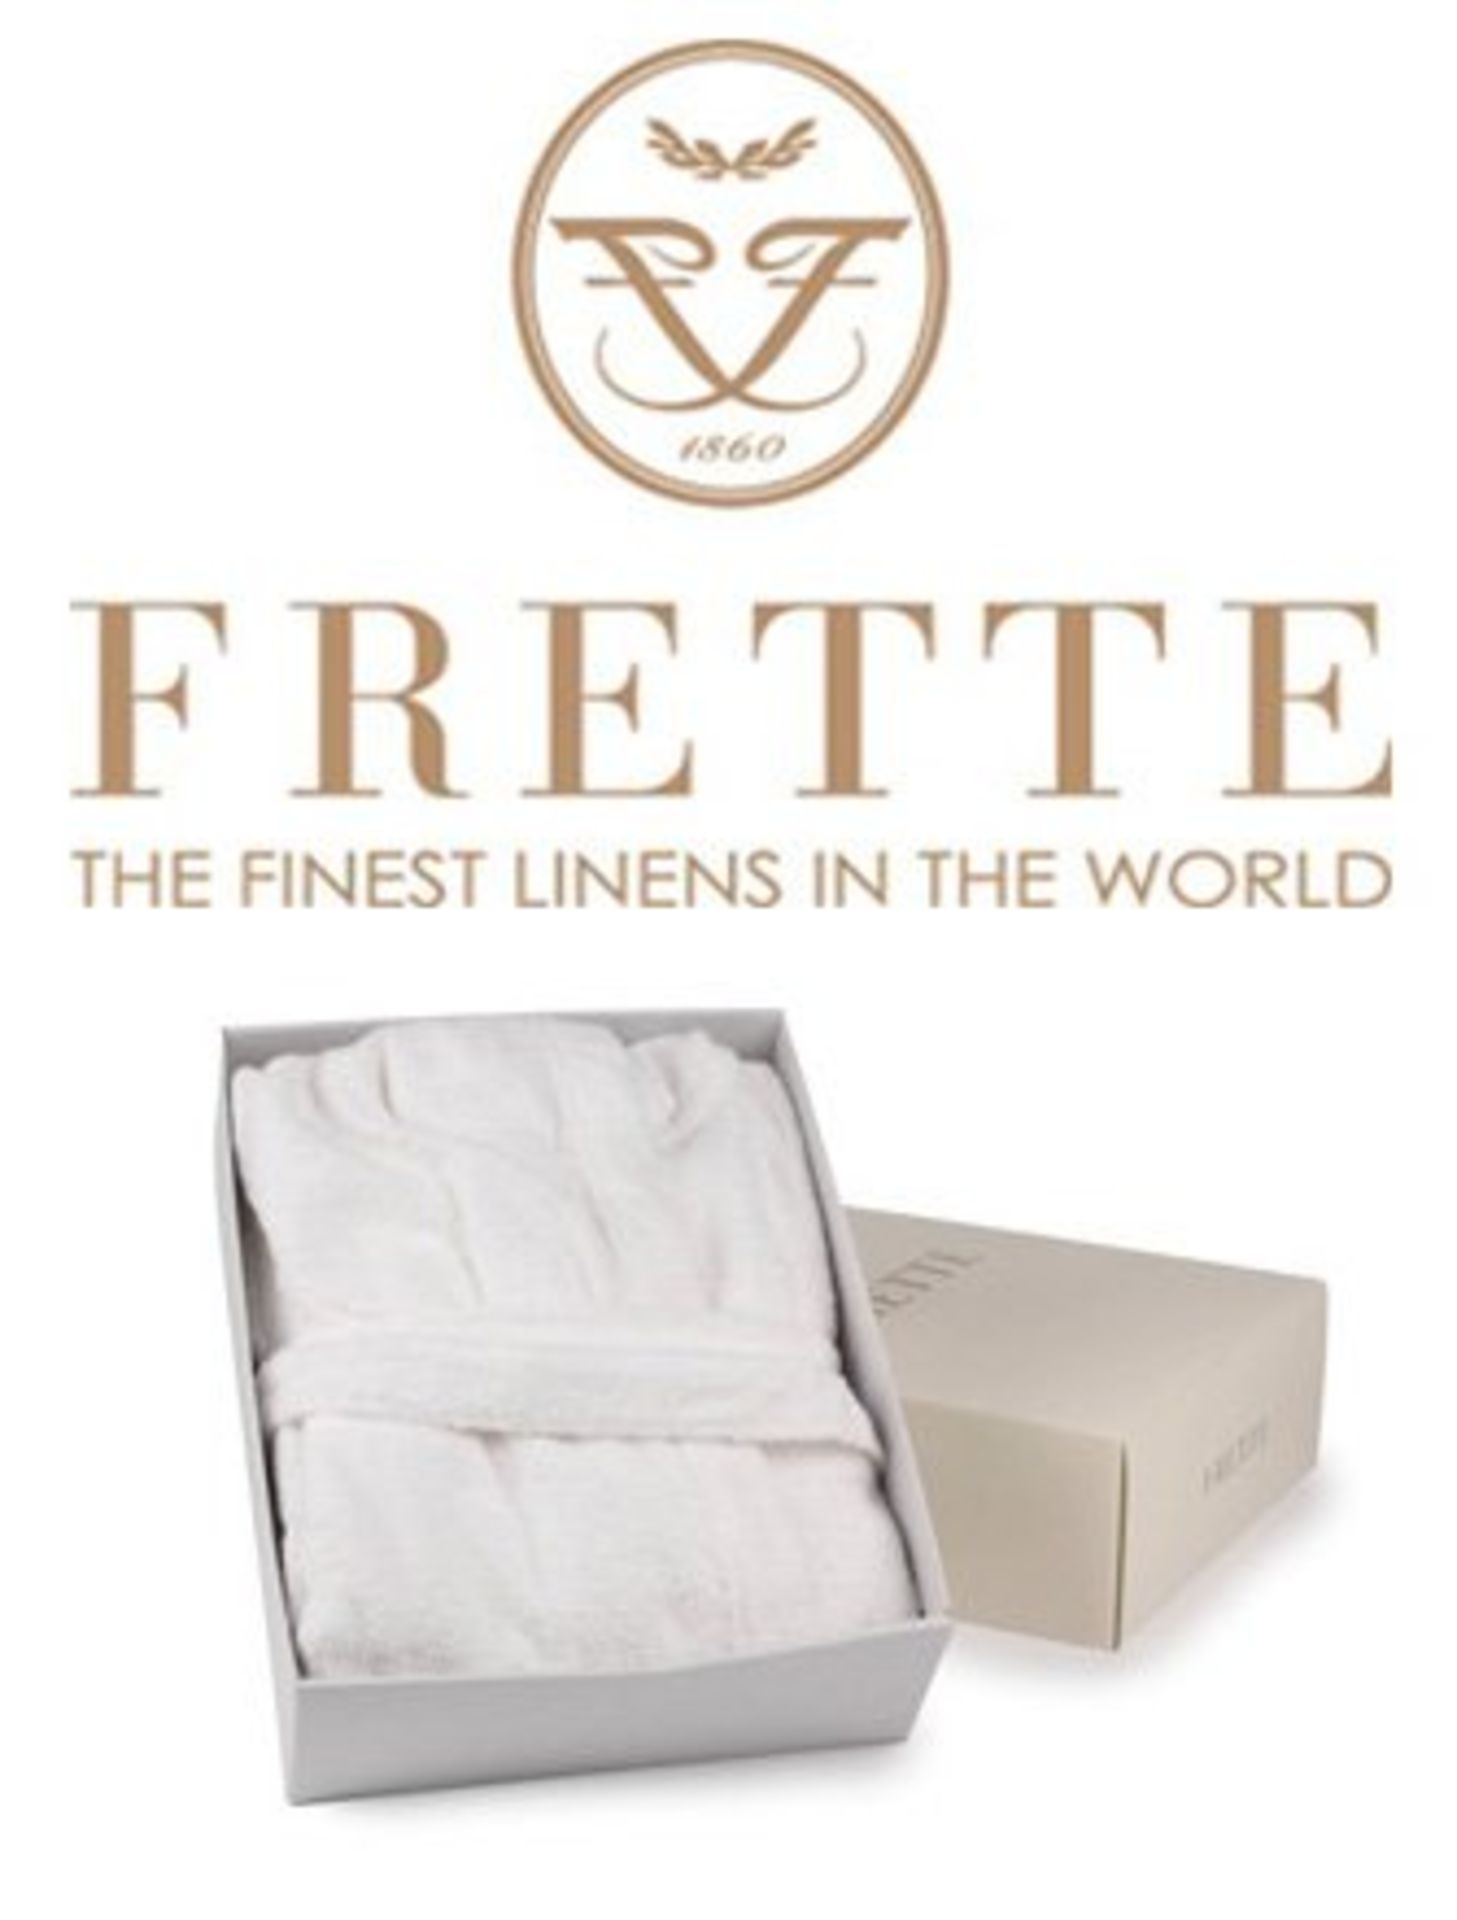 V Brand New Frette Luxury Italian 100% Open Ended High Quality Cotton White Bath Robe with Hood - Image 2 of 2